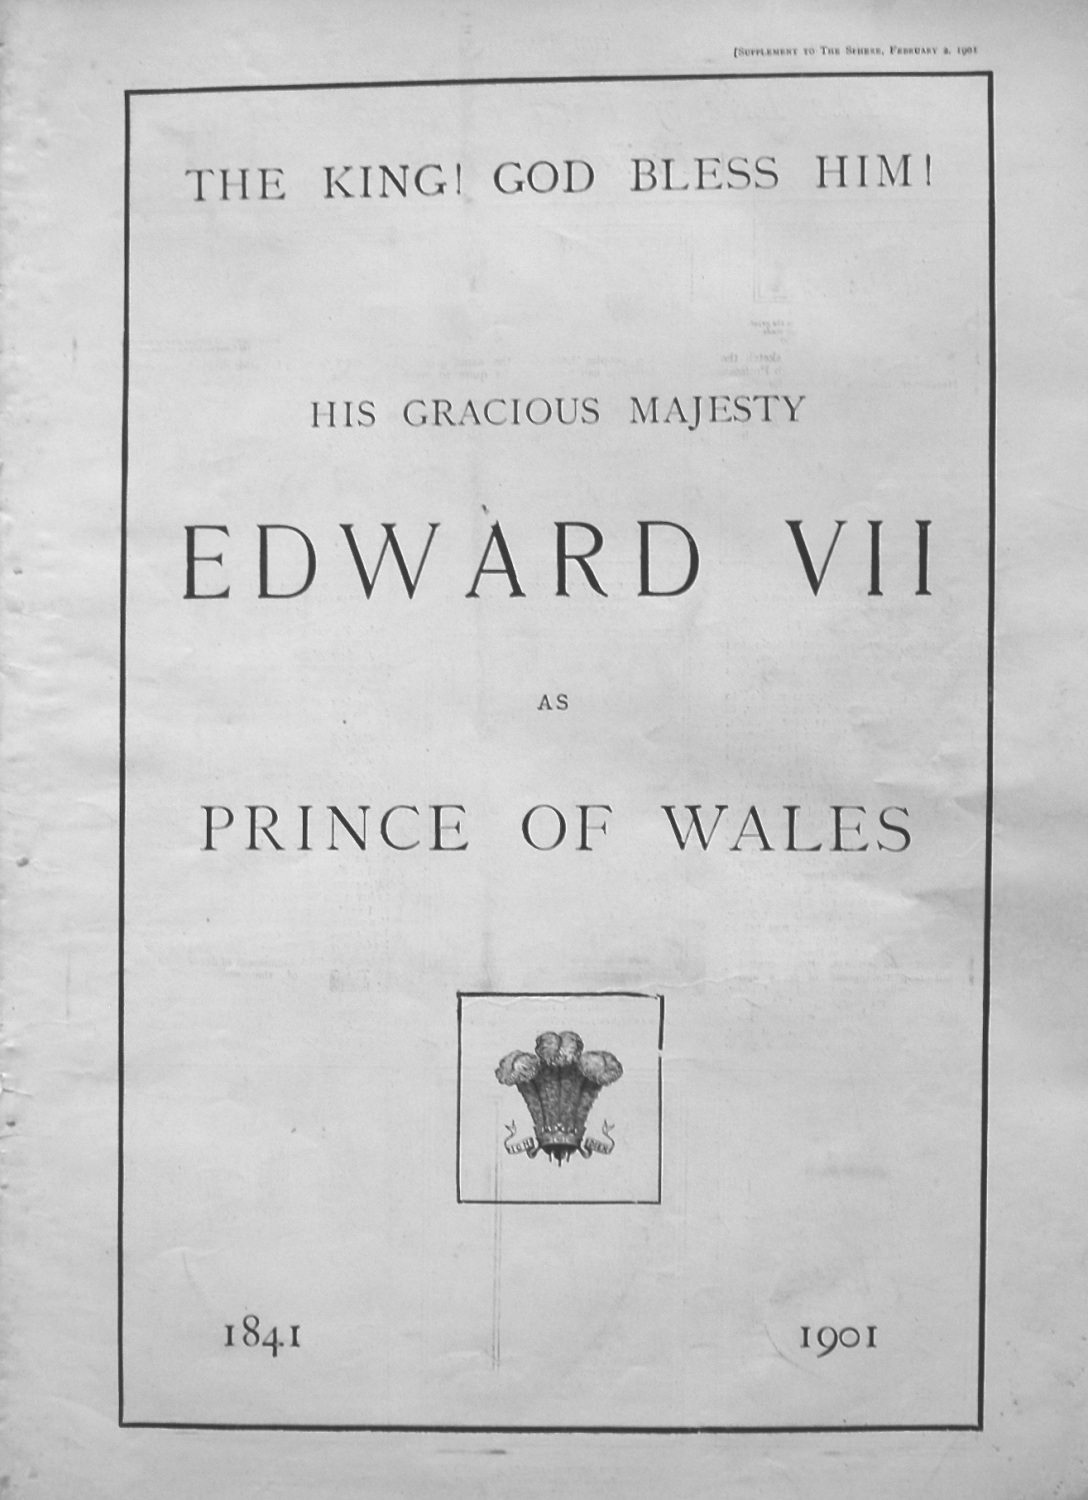 His Gracious Majesty Edward VII as Prince of Wales 1841 to 1901.